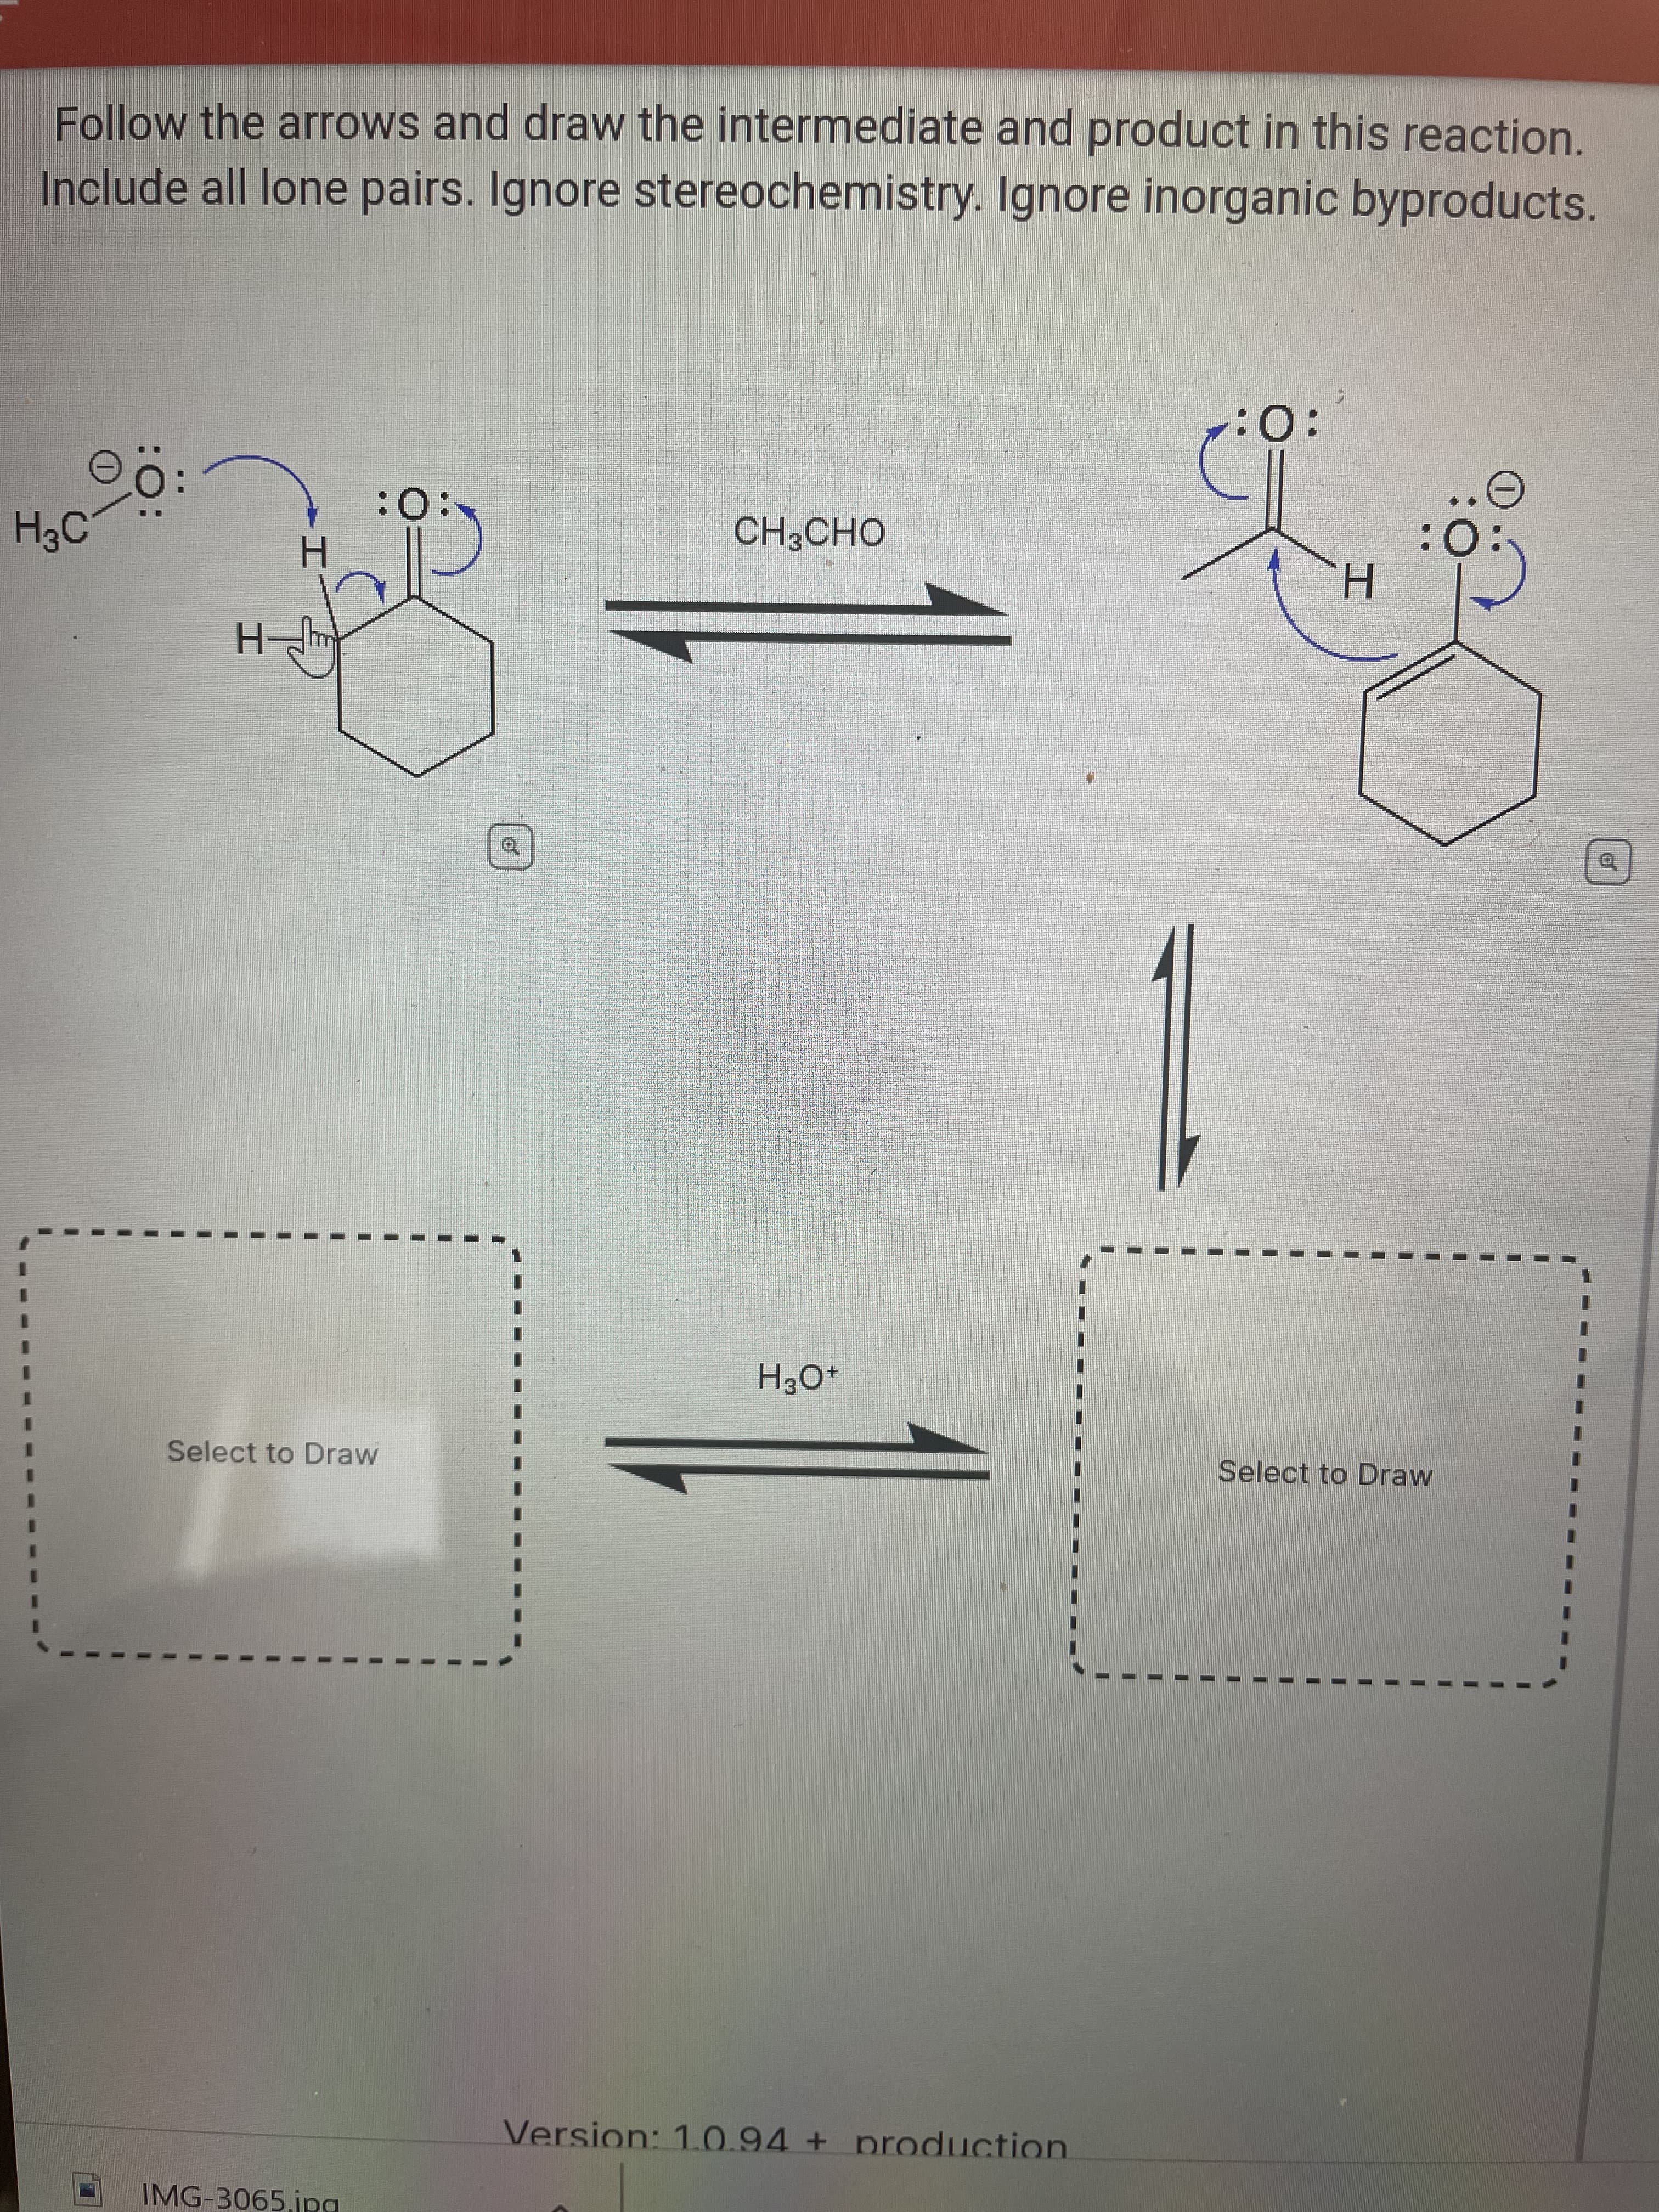 Follow the arrows and draw the intermediate and product in this reaction.
Include all lone pairs. Ignore stereochemistry. Ignore inorganic byproducts.
:0:
H3C
:0:
CH3CHO
O:
H.
-H-
of
+O°H
Select to Draw
Select to Draw
Version: 1.0.94 + production
IMG-3065 jpa
